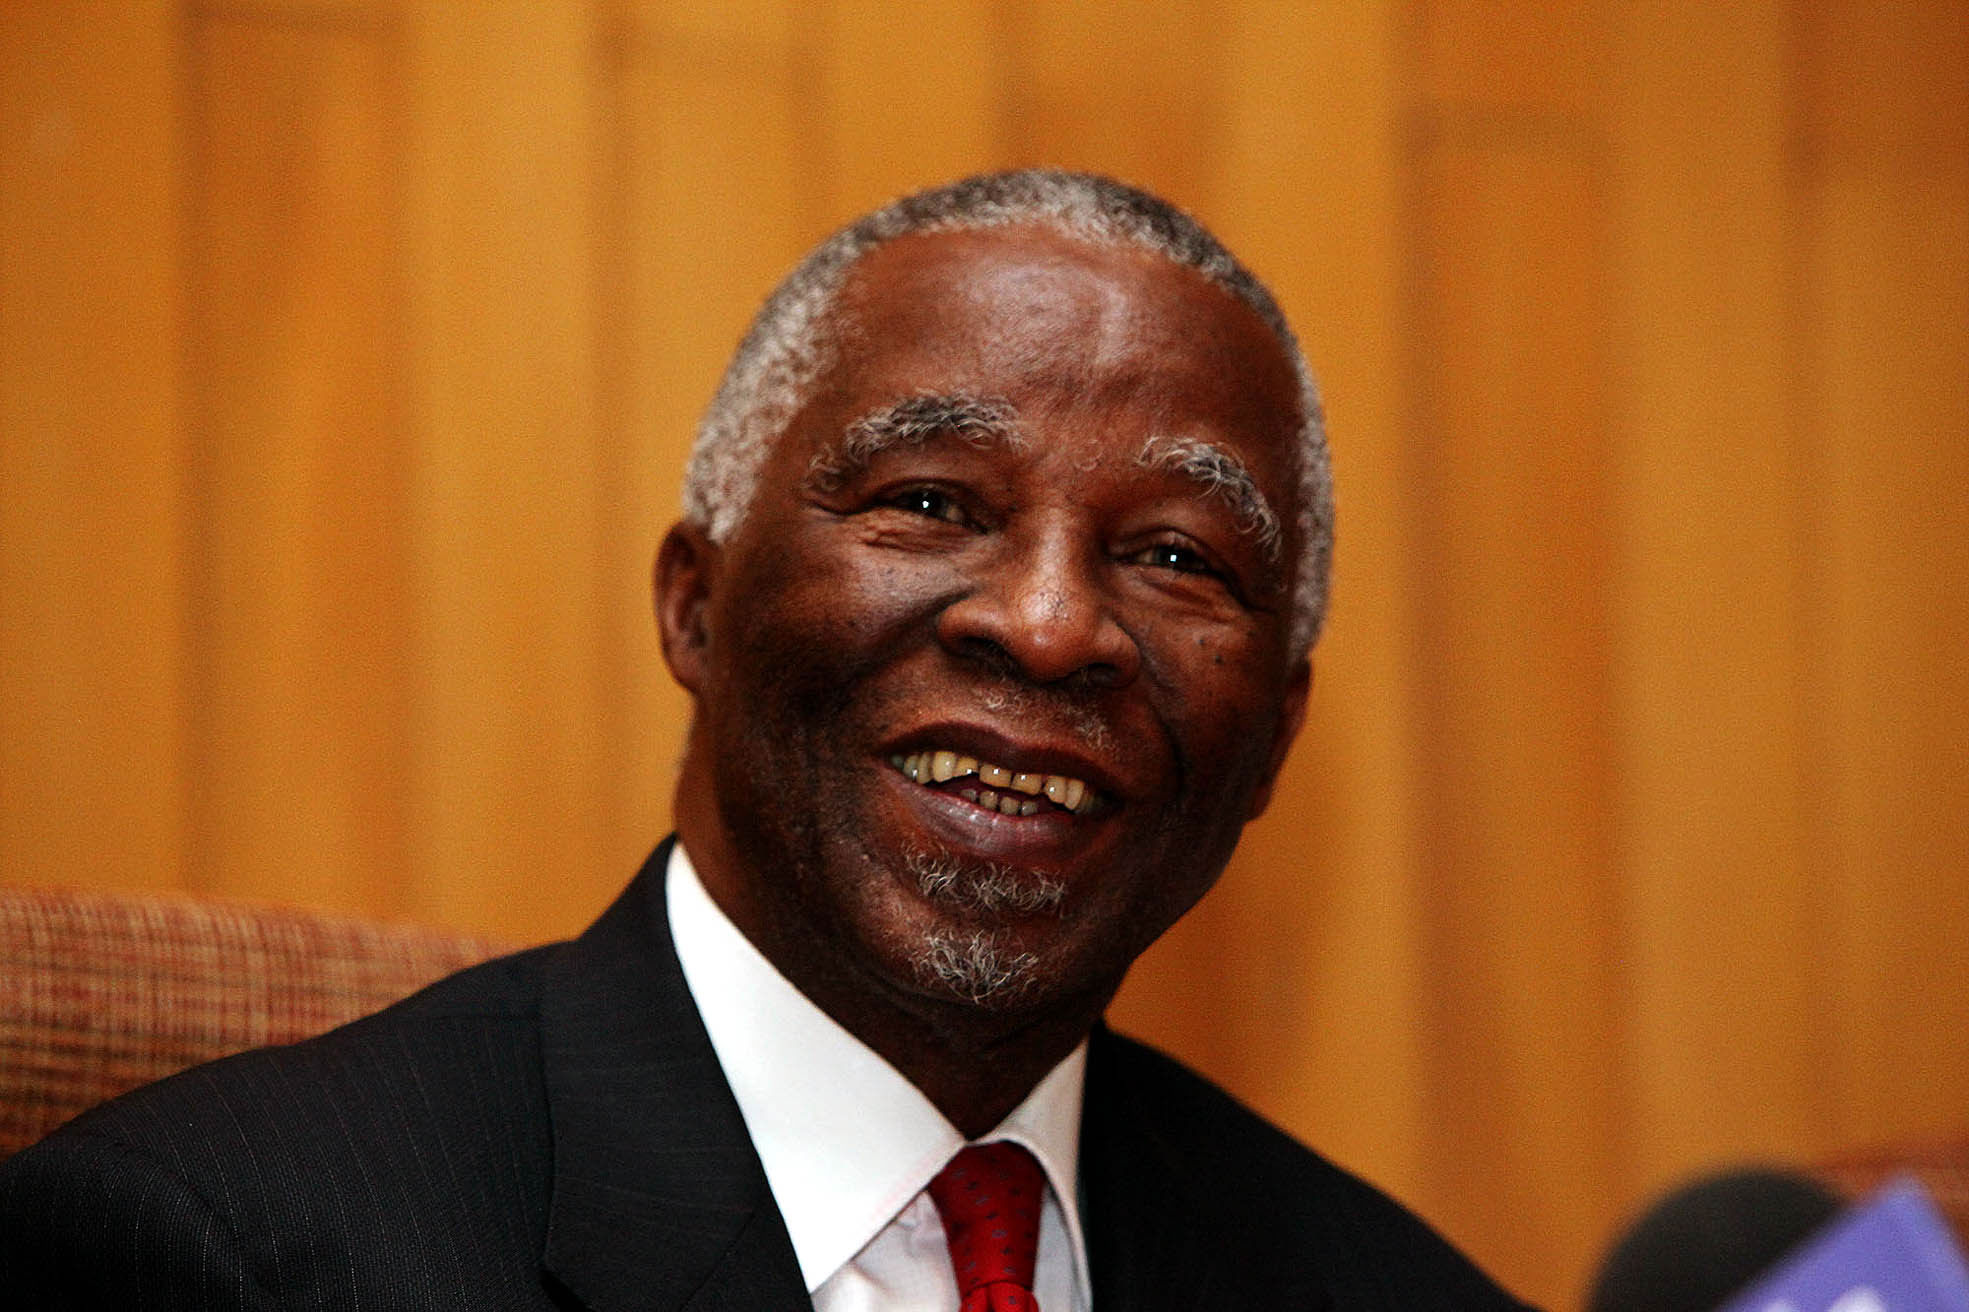 Former president Thabo Mbeki will be attending the centenary celebrations, his first attendance at an ANC event of this magnitude since his ousting in 2008. His appearance is likely to shed some light on what his role will be in the run-up to the ANC elective conference.